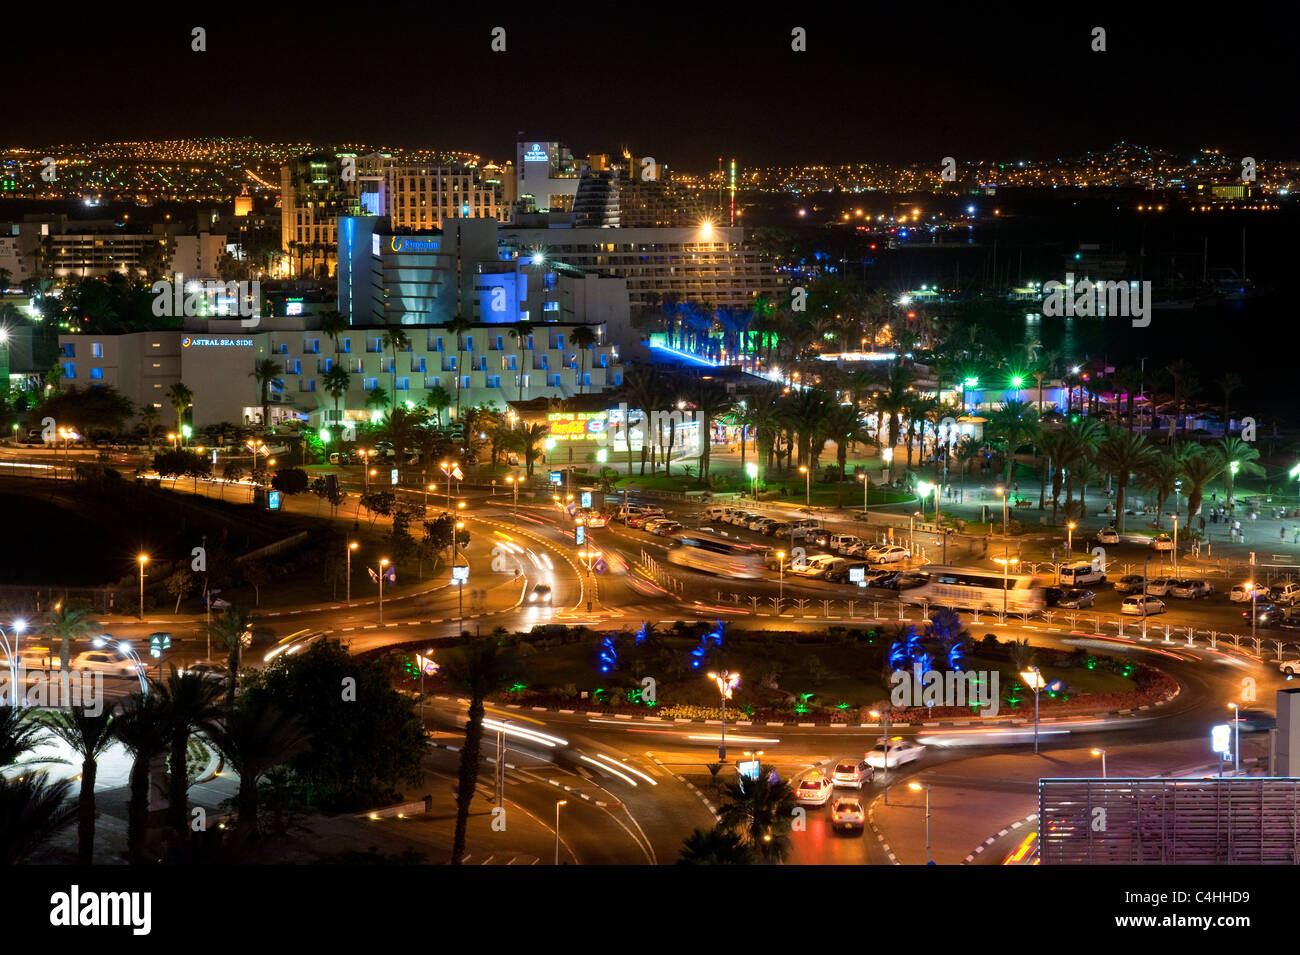 A view of the hotel and beach area of Eilat at night with the lights of Aqaba in the background. Stock Photo